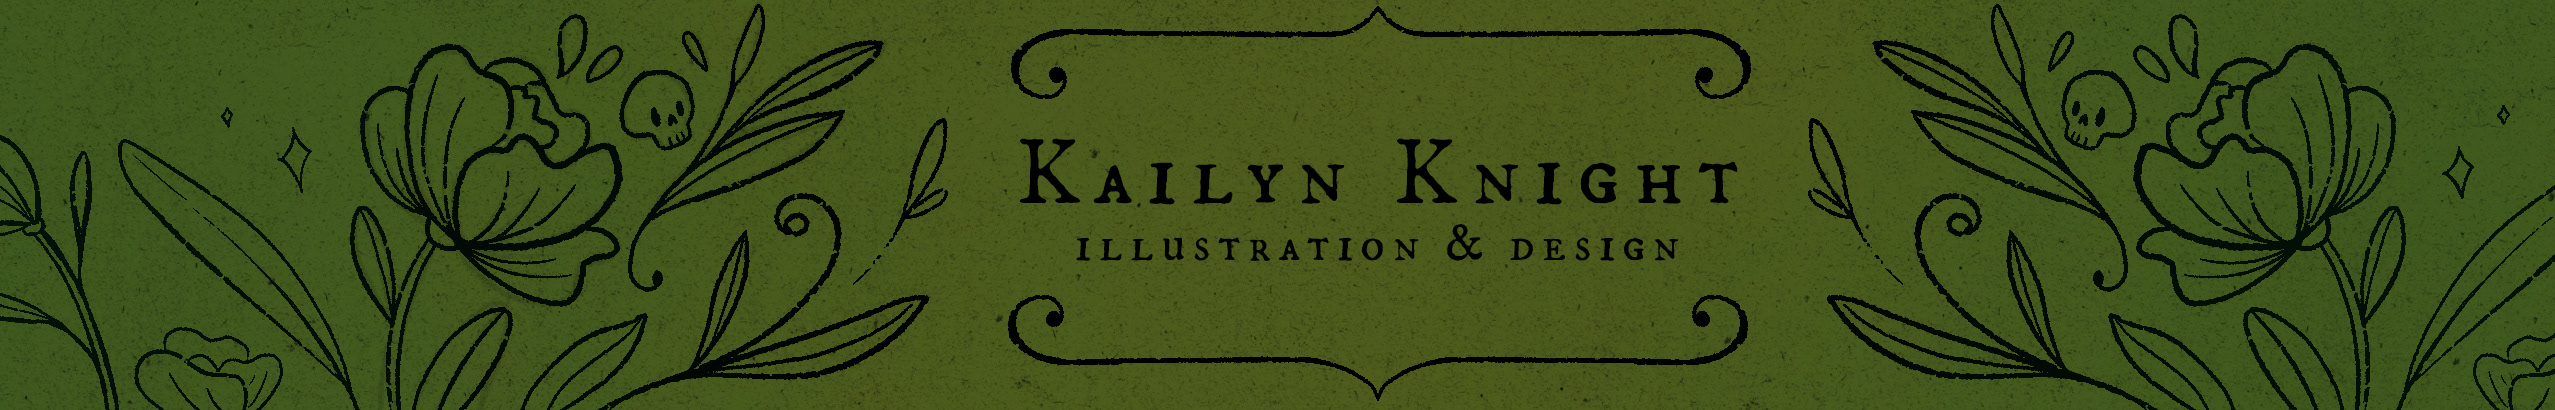 Kailyn Knight's profile banner